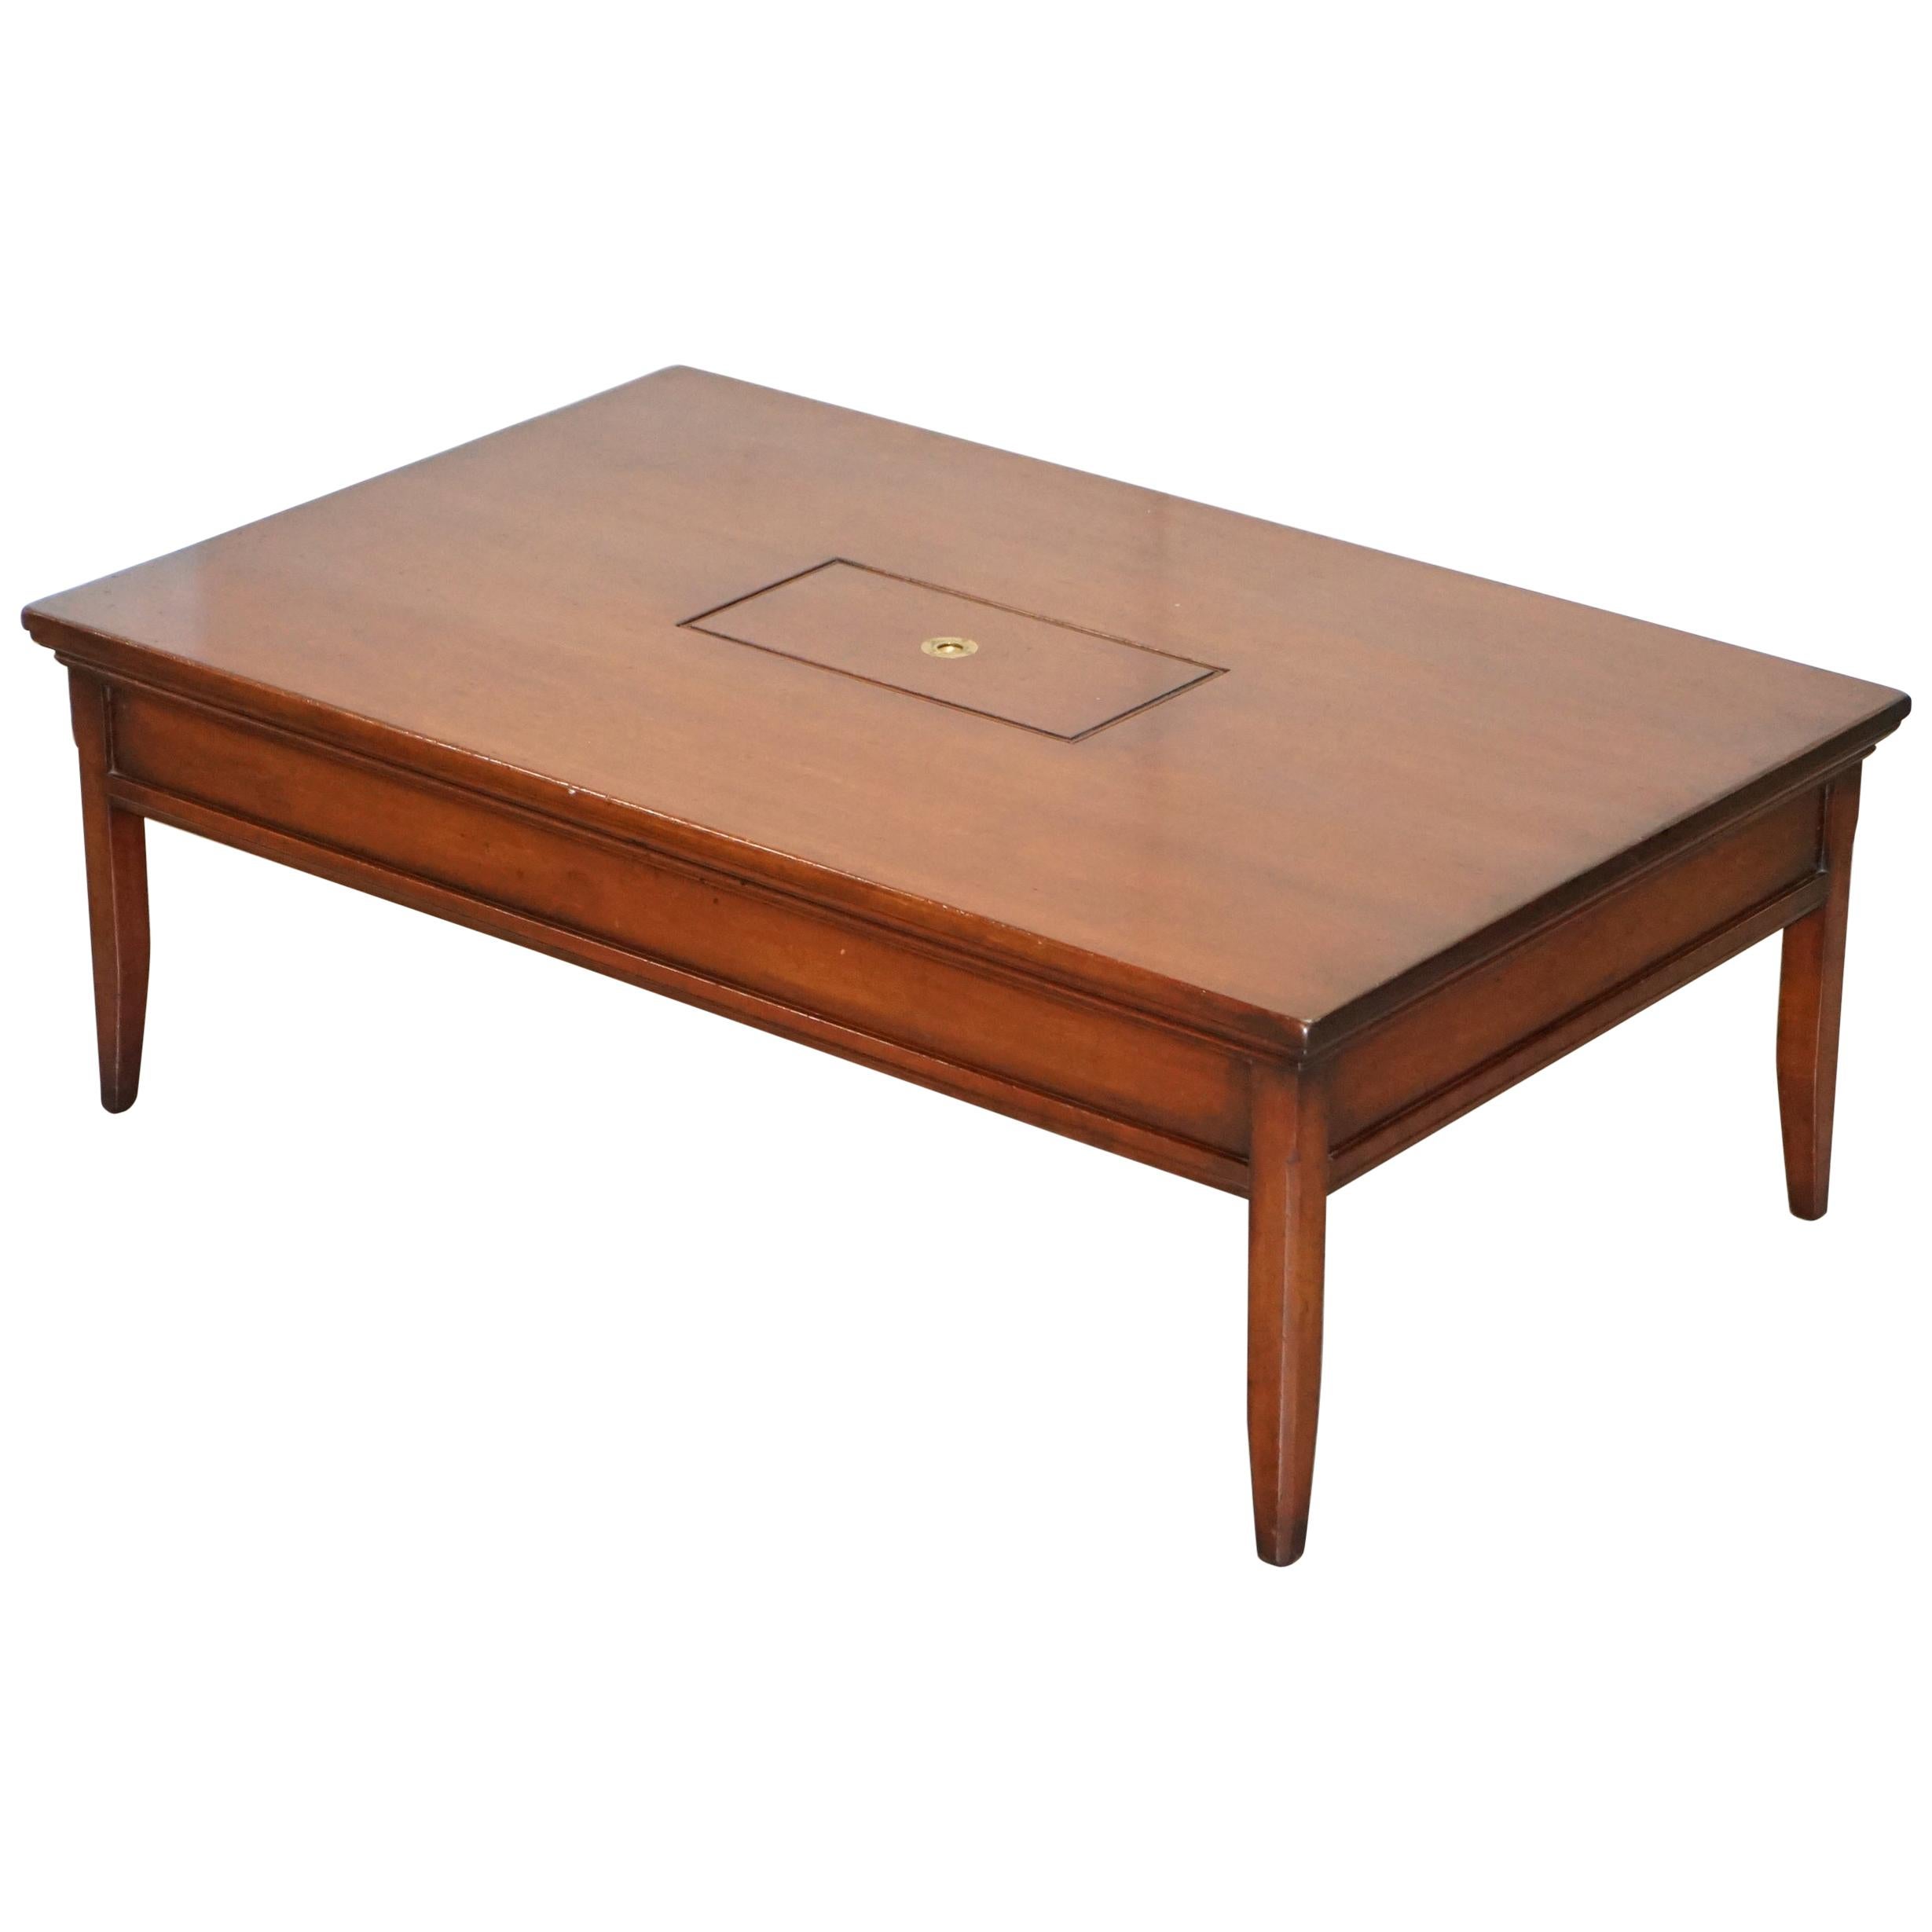 1 of 2 Hardwood Harrods Kennedy Military Campaign Coffee Table Internal Storage